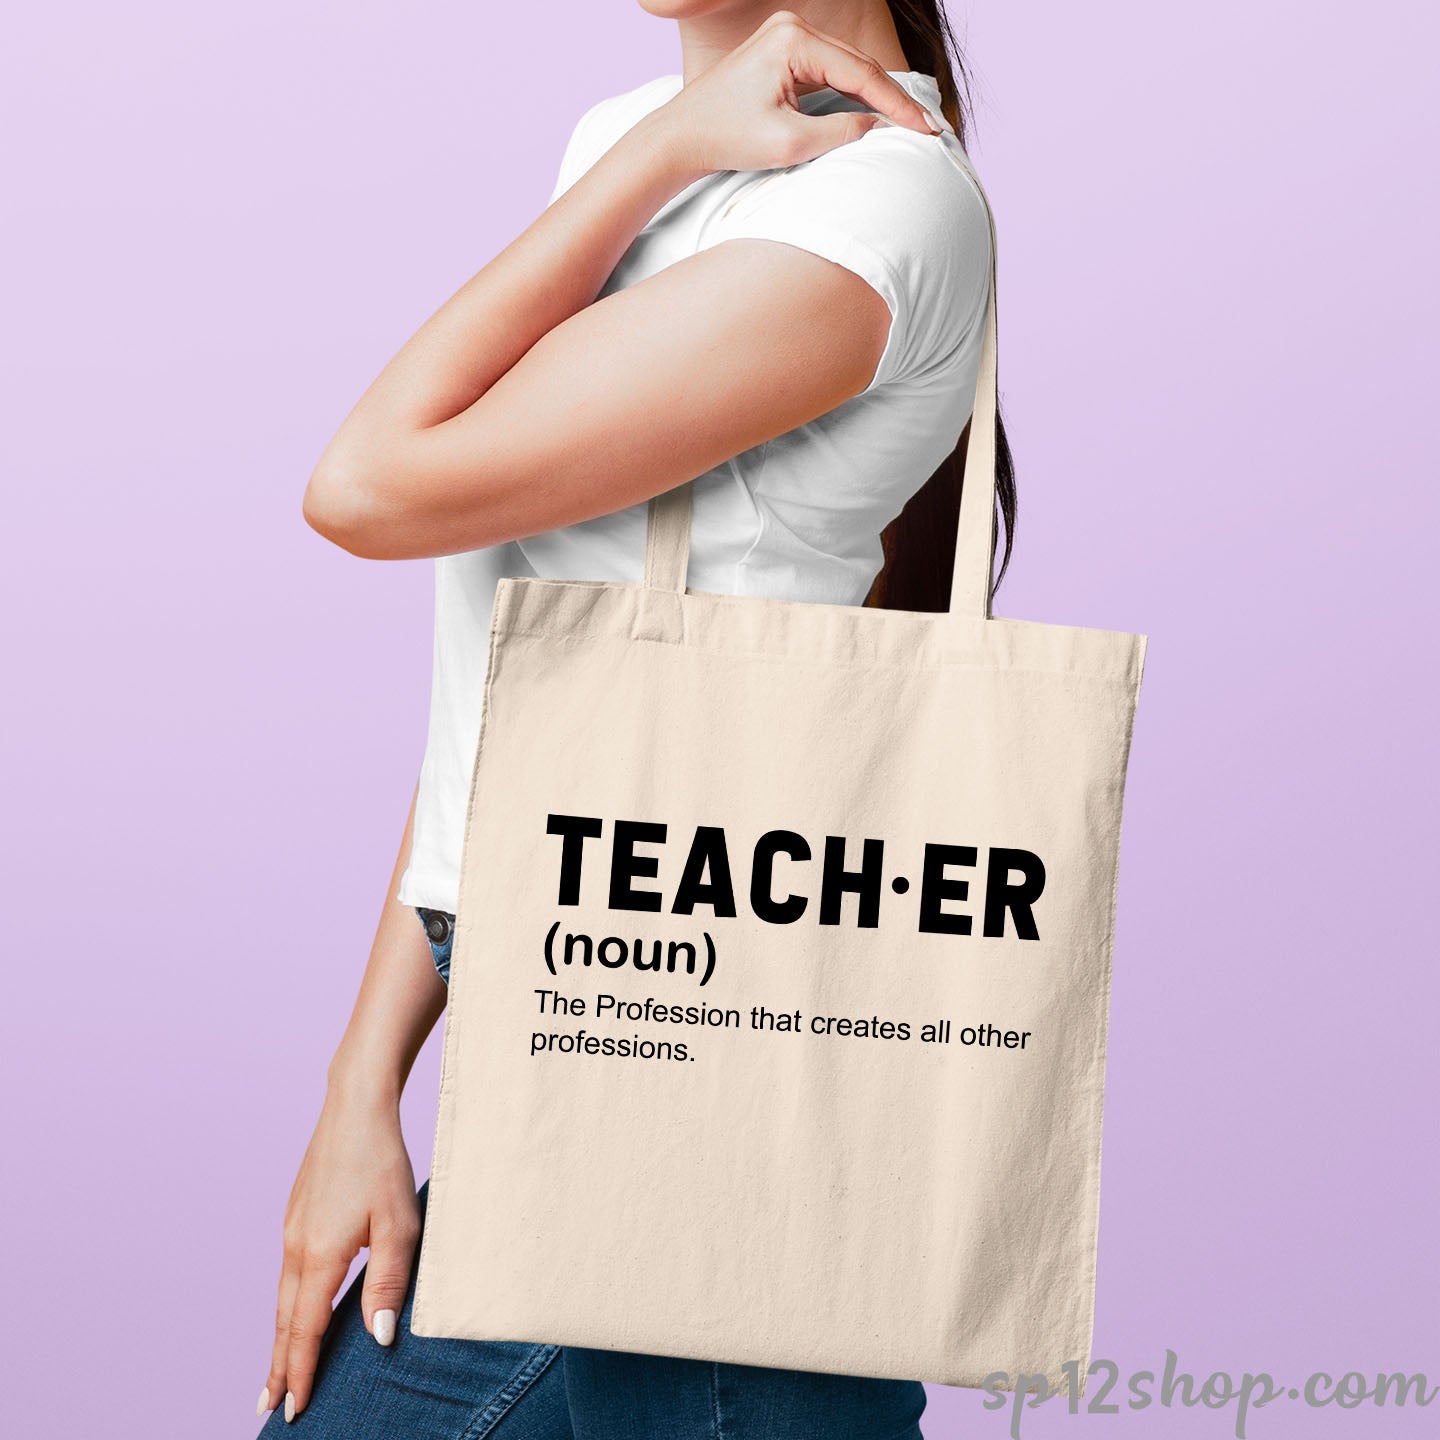 Teacher The Professions That Creates All Other Professions Tote Bag